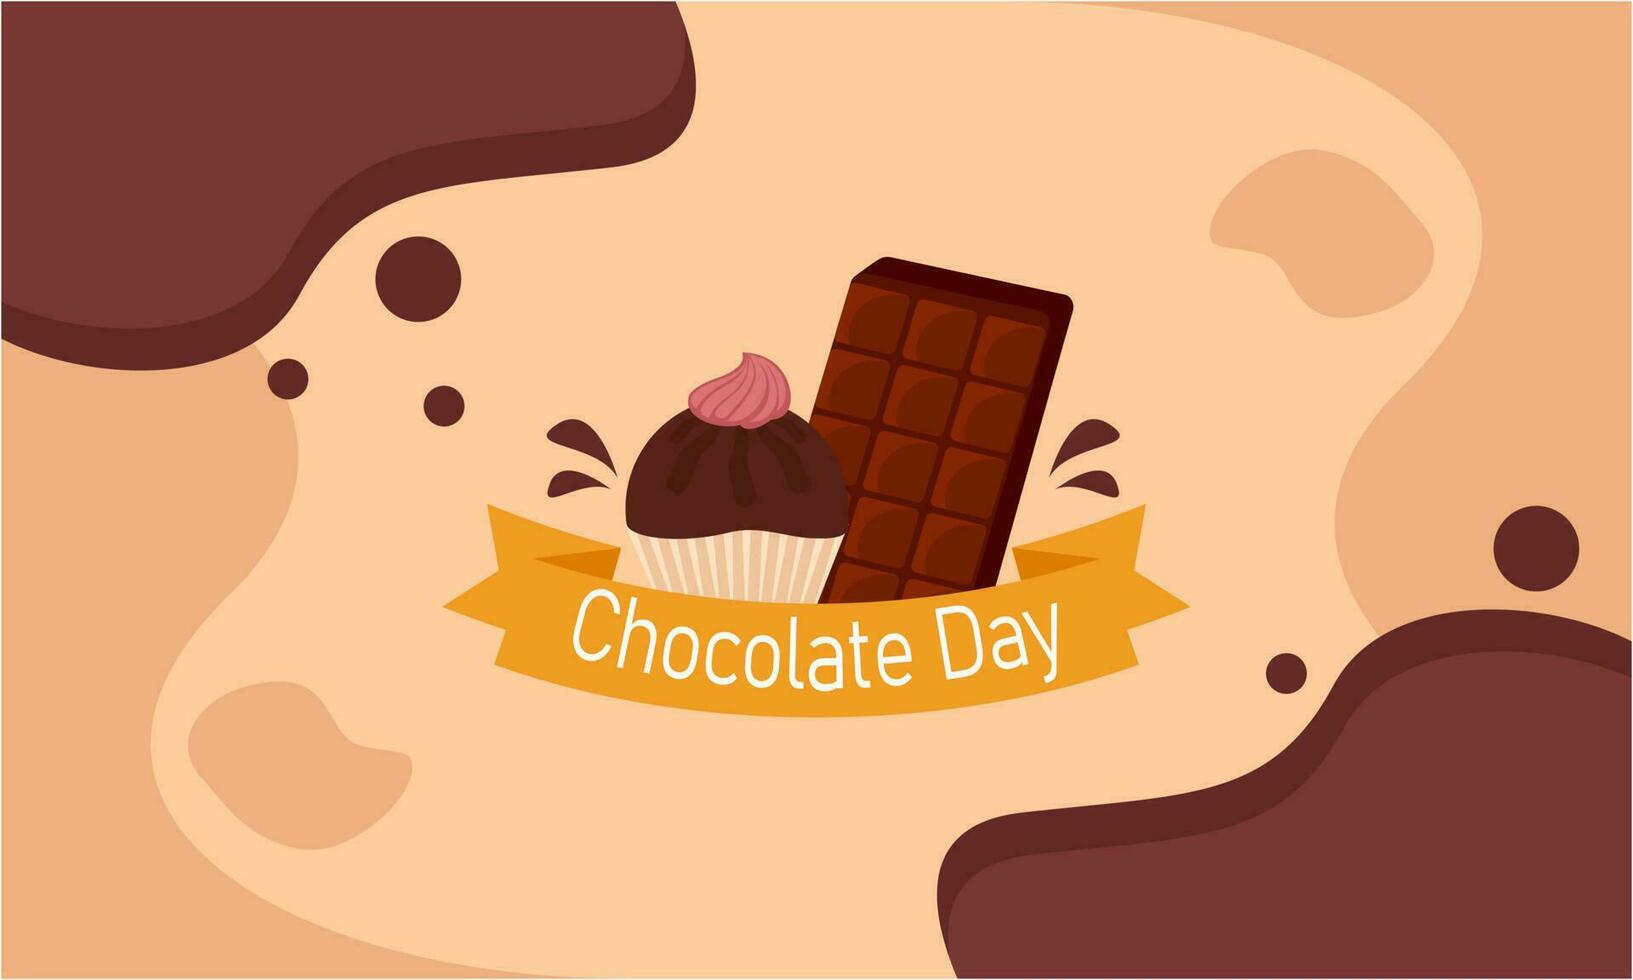 Happy world chocolate day illustration with chocolate logo vector